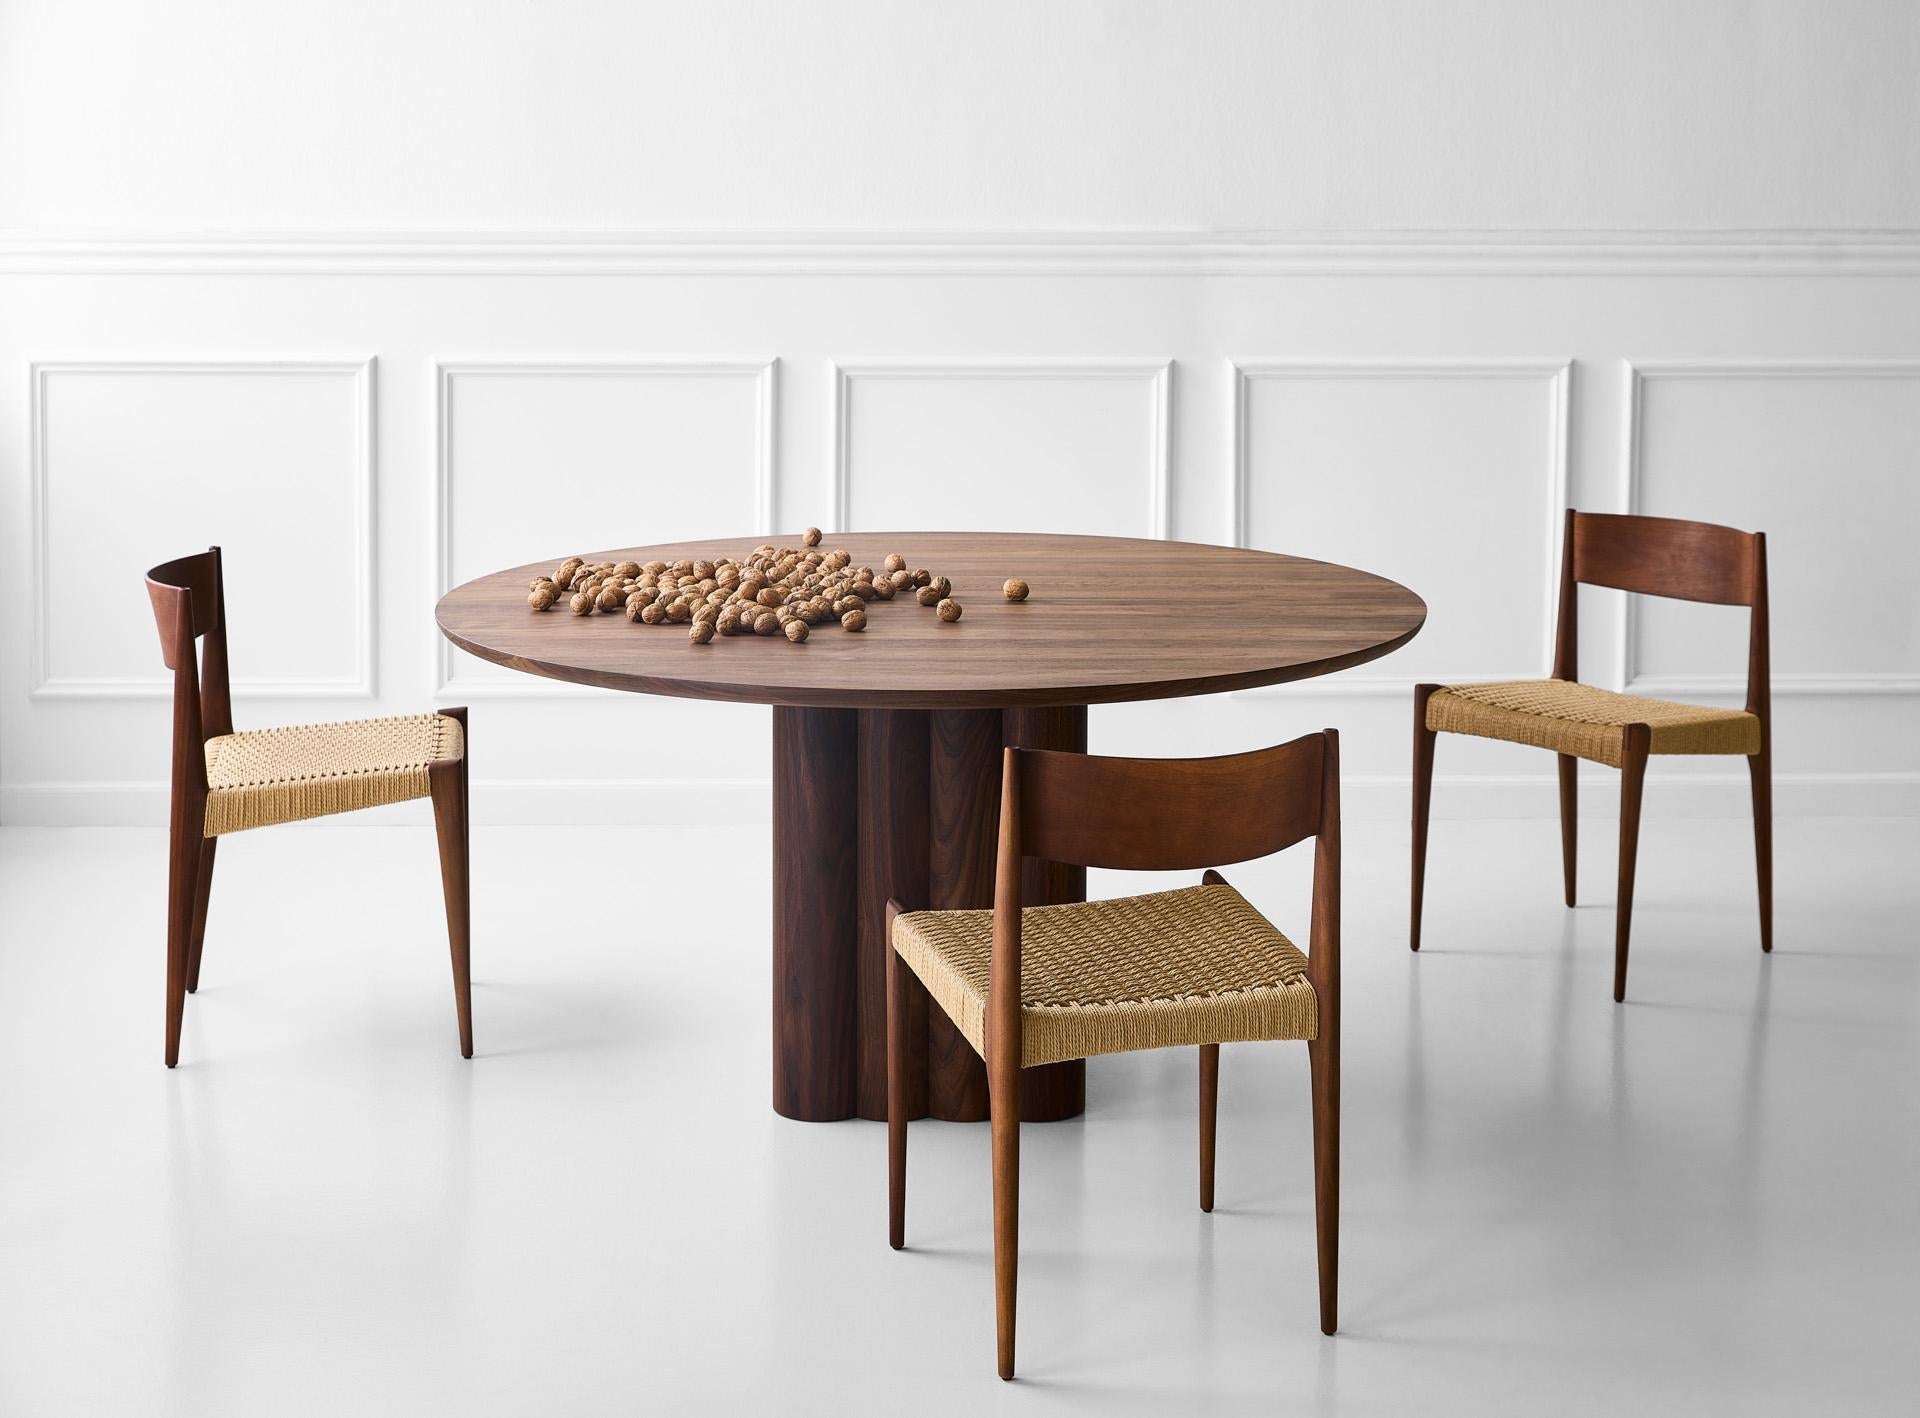 PLUSH dining table, round, 150 cm.
Solid wood table top and legs. Handmade in Denmark. 
Signed by Jacob Plejdrup for DK3

Table's height: 72 or 74 cm

Sold model: 
Smoked Oak
Cube base: 46x46 cm
Table top Thickness: 30 mm
(Extraction for max. 2